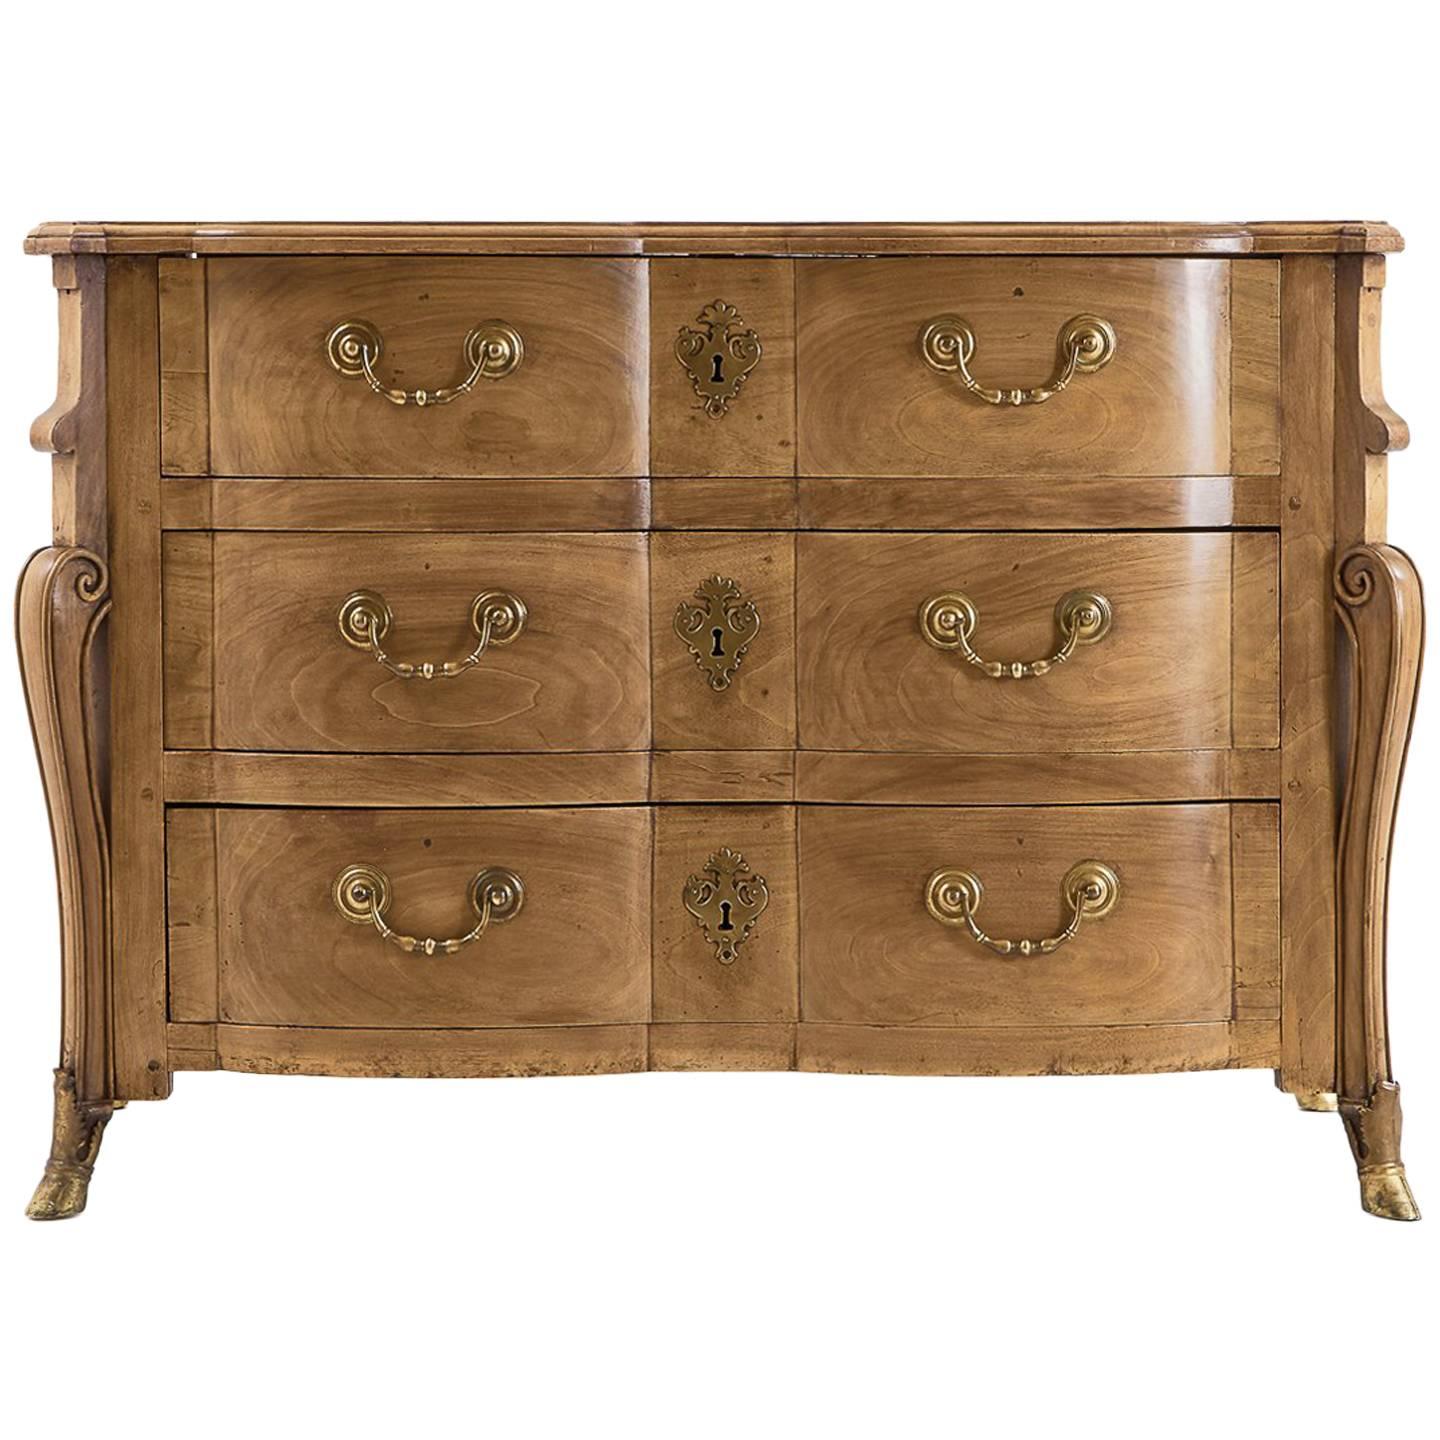 Early 18th Century French Mazarine Commode